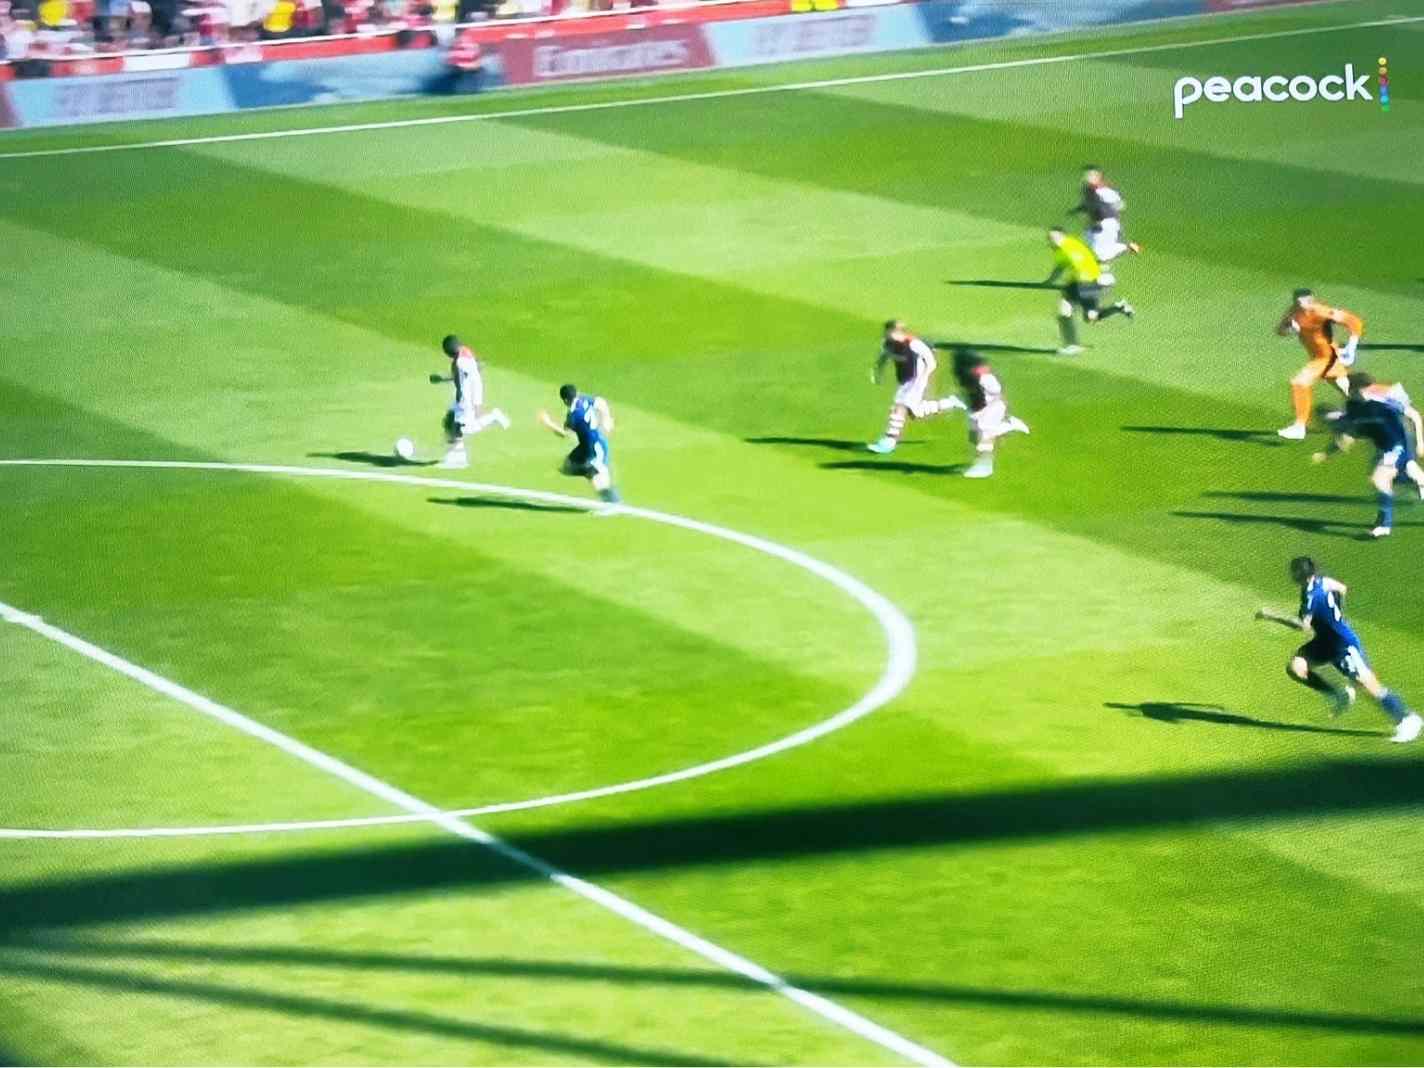 The photo shows Nicolas Pepe with the ball running towards the Leeds goal.